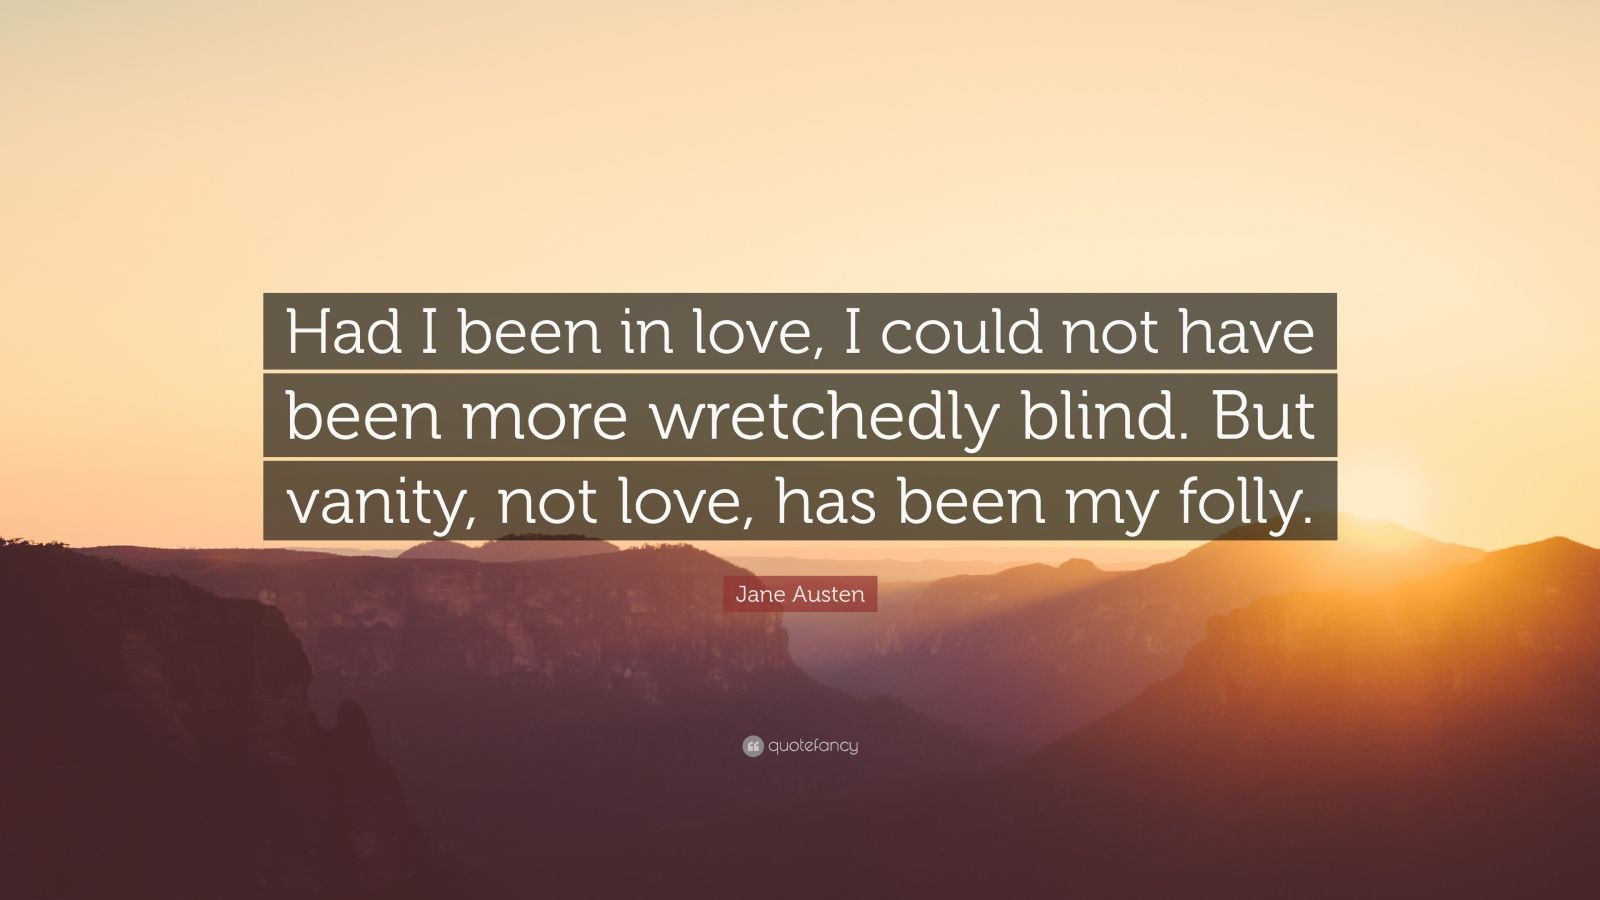 Jane Austen Quotes On Love
 Jane Austen Quote “Had I been in love I could not have